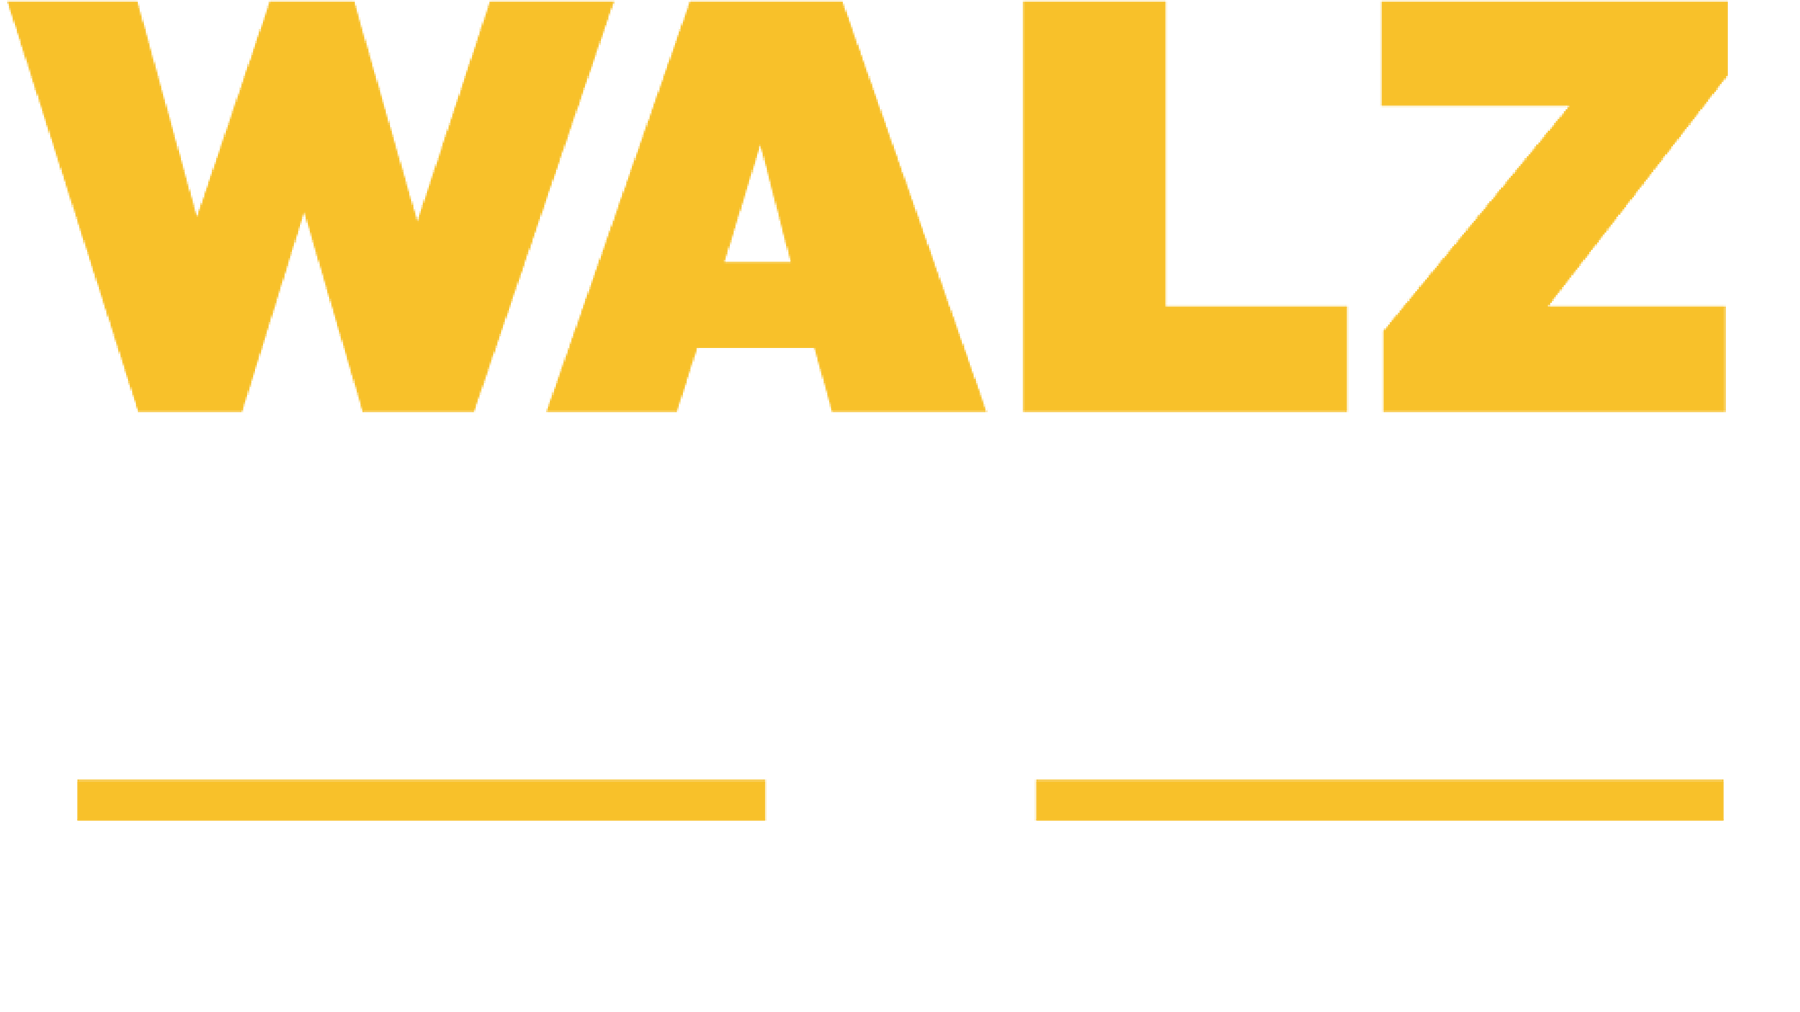 This image of the Tim Walz logo is used to exemplify how NGP Van’s democratic campaign software helped advance his campaign.